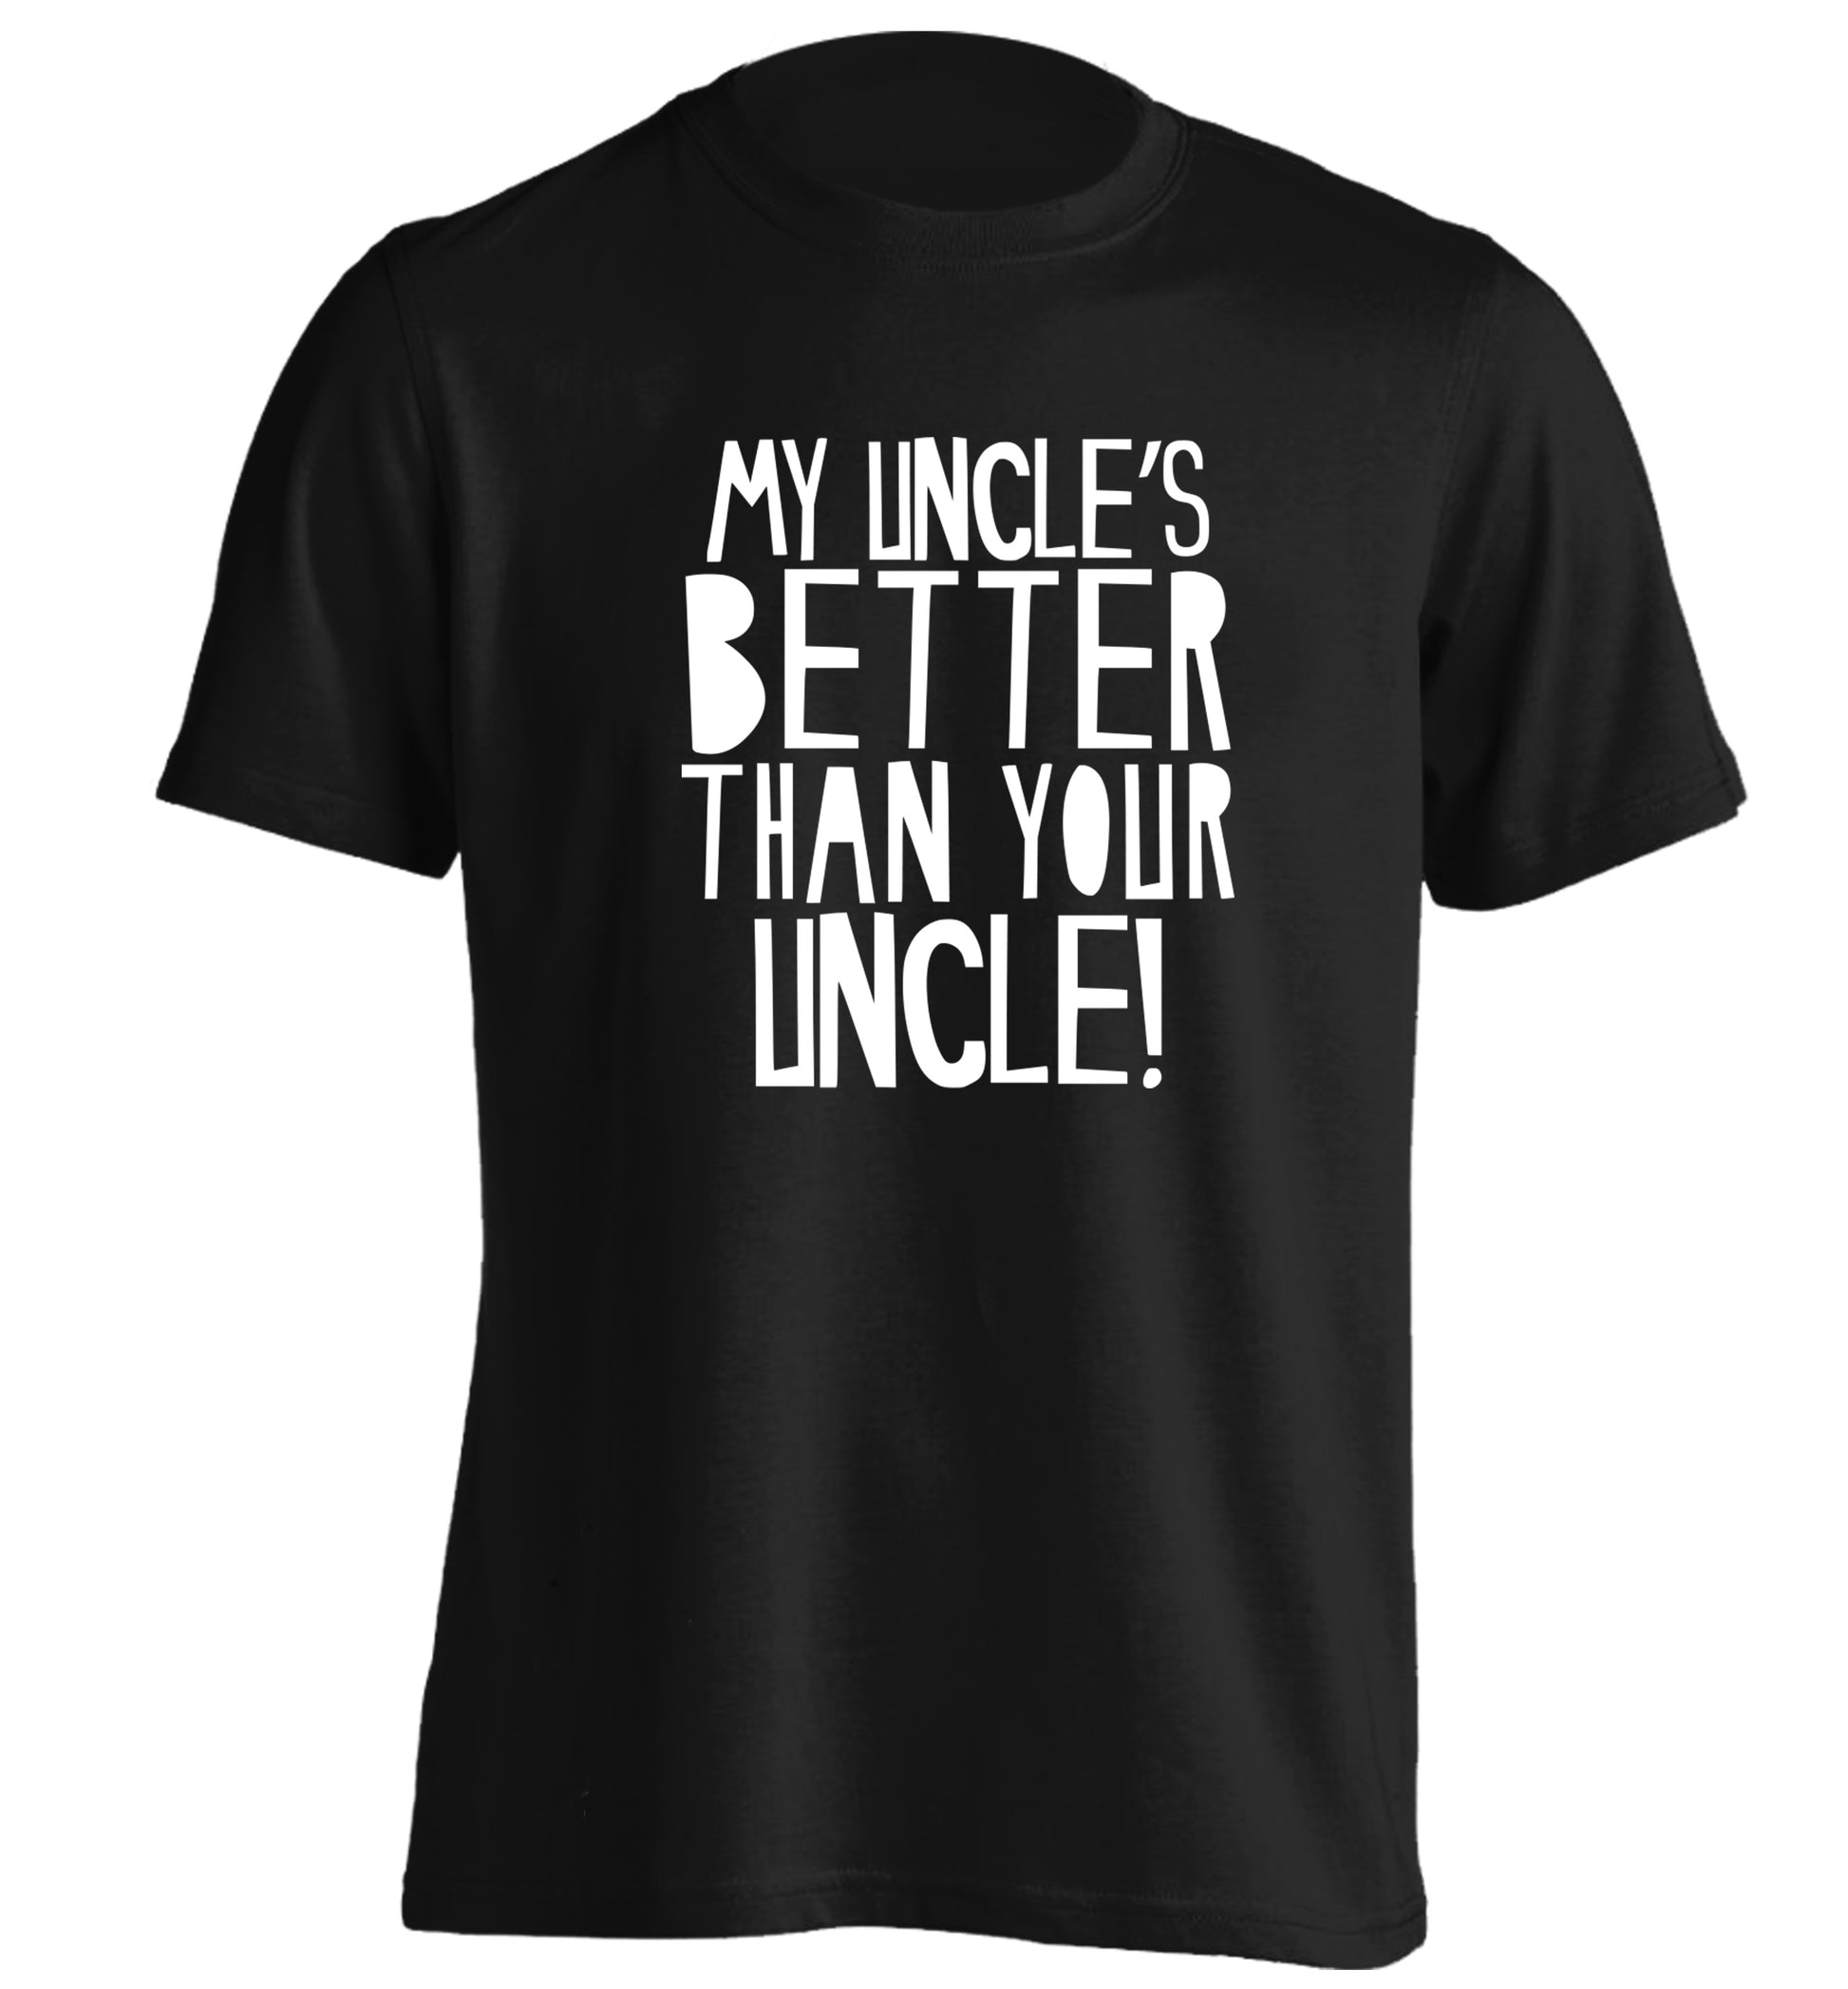 My uncles better than your uncle adults unisex black Tshirt 2XL